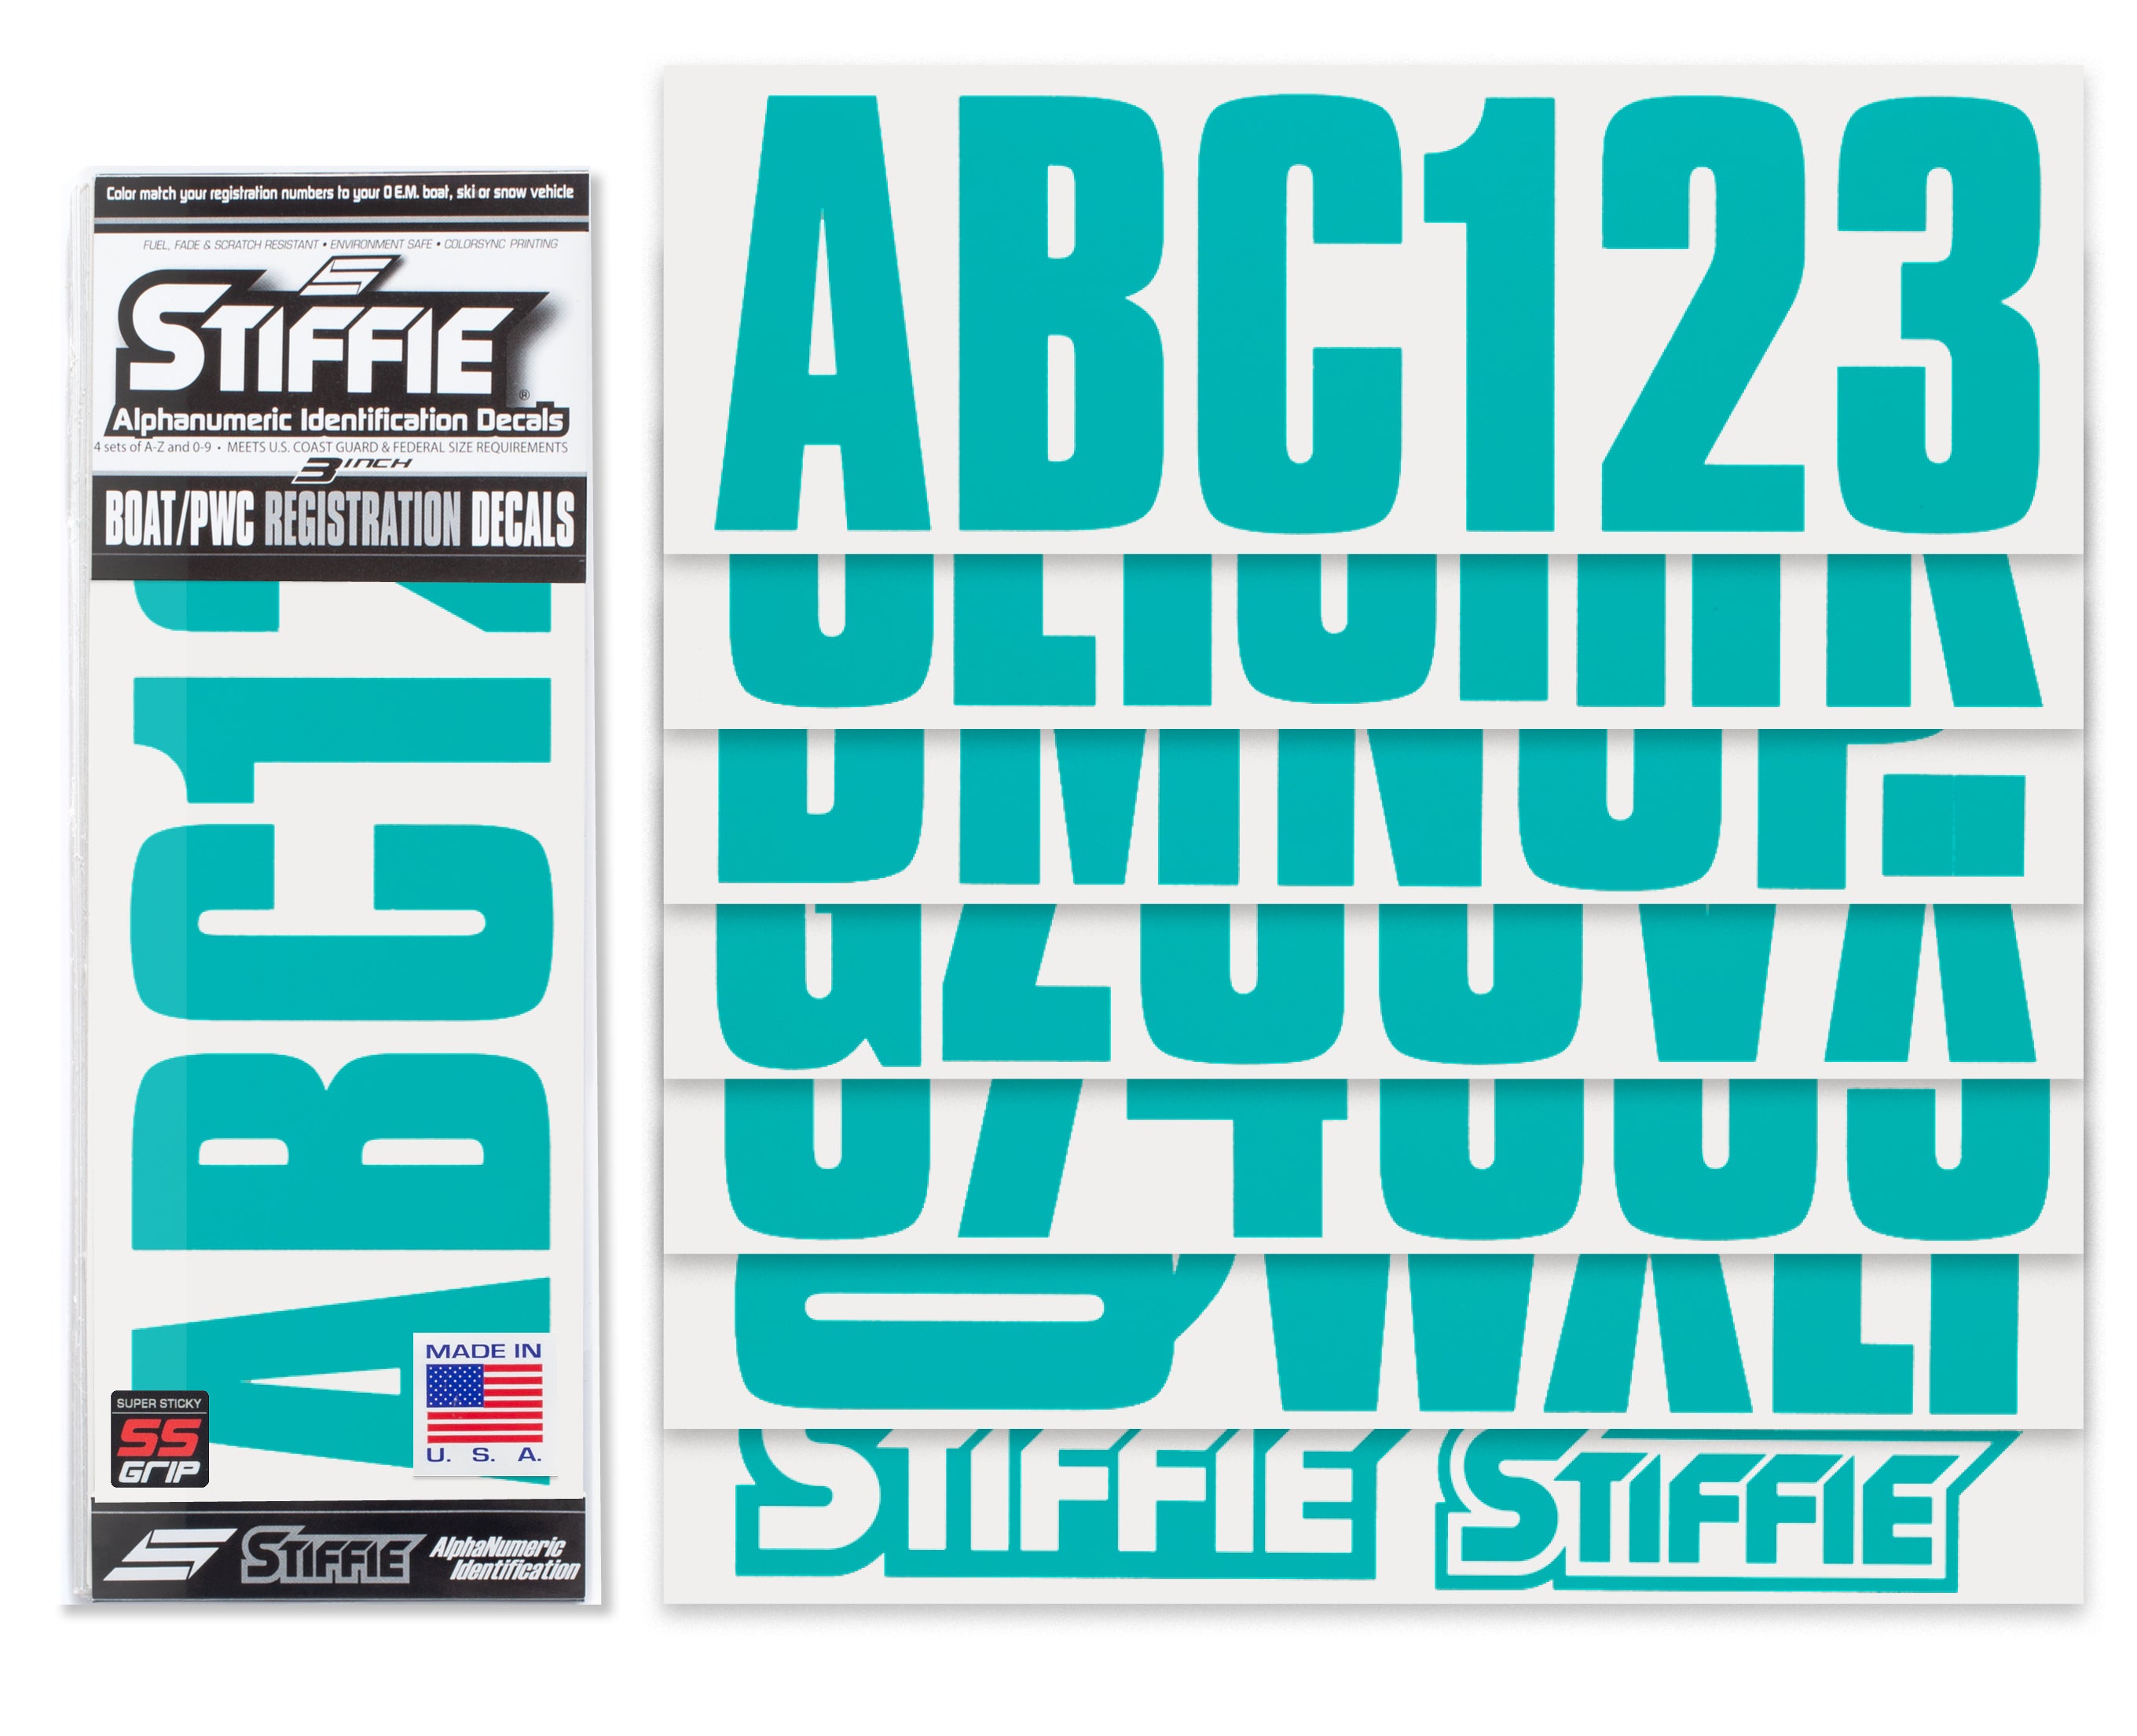 STIFFIE Uniline Candy Blue Super Sticky 3" Alpha Numeric Registration Identification Numbers Stickers Decals for Sea-Doo Spark, Inflatable Boats, Ribs, Hypalon/PVC, PWC and Boats